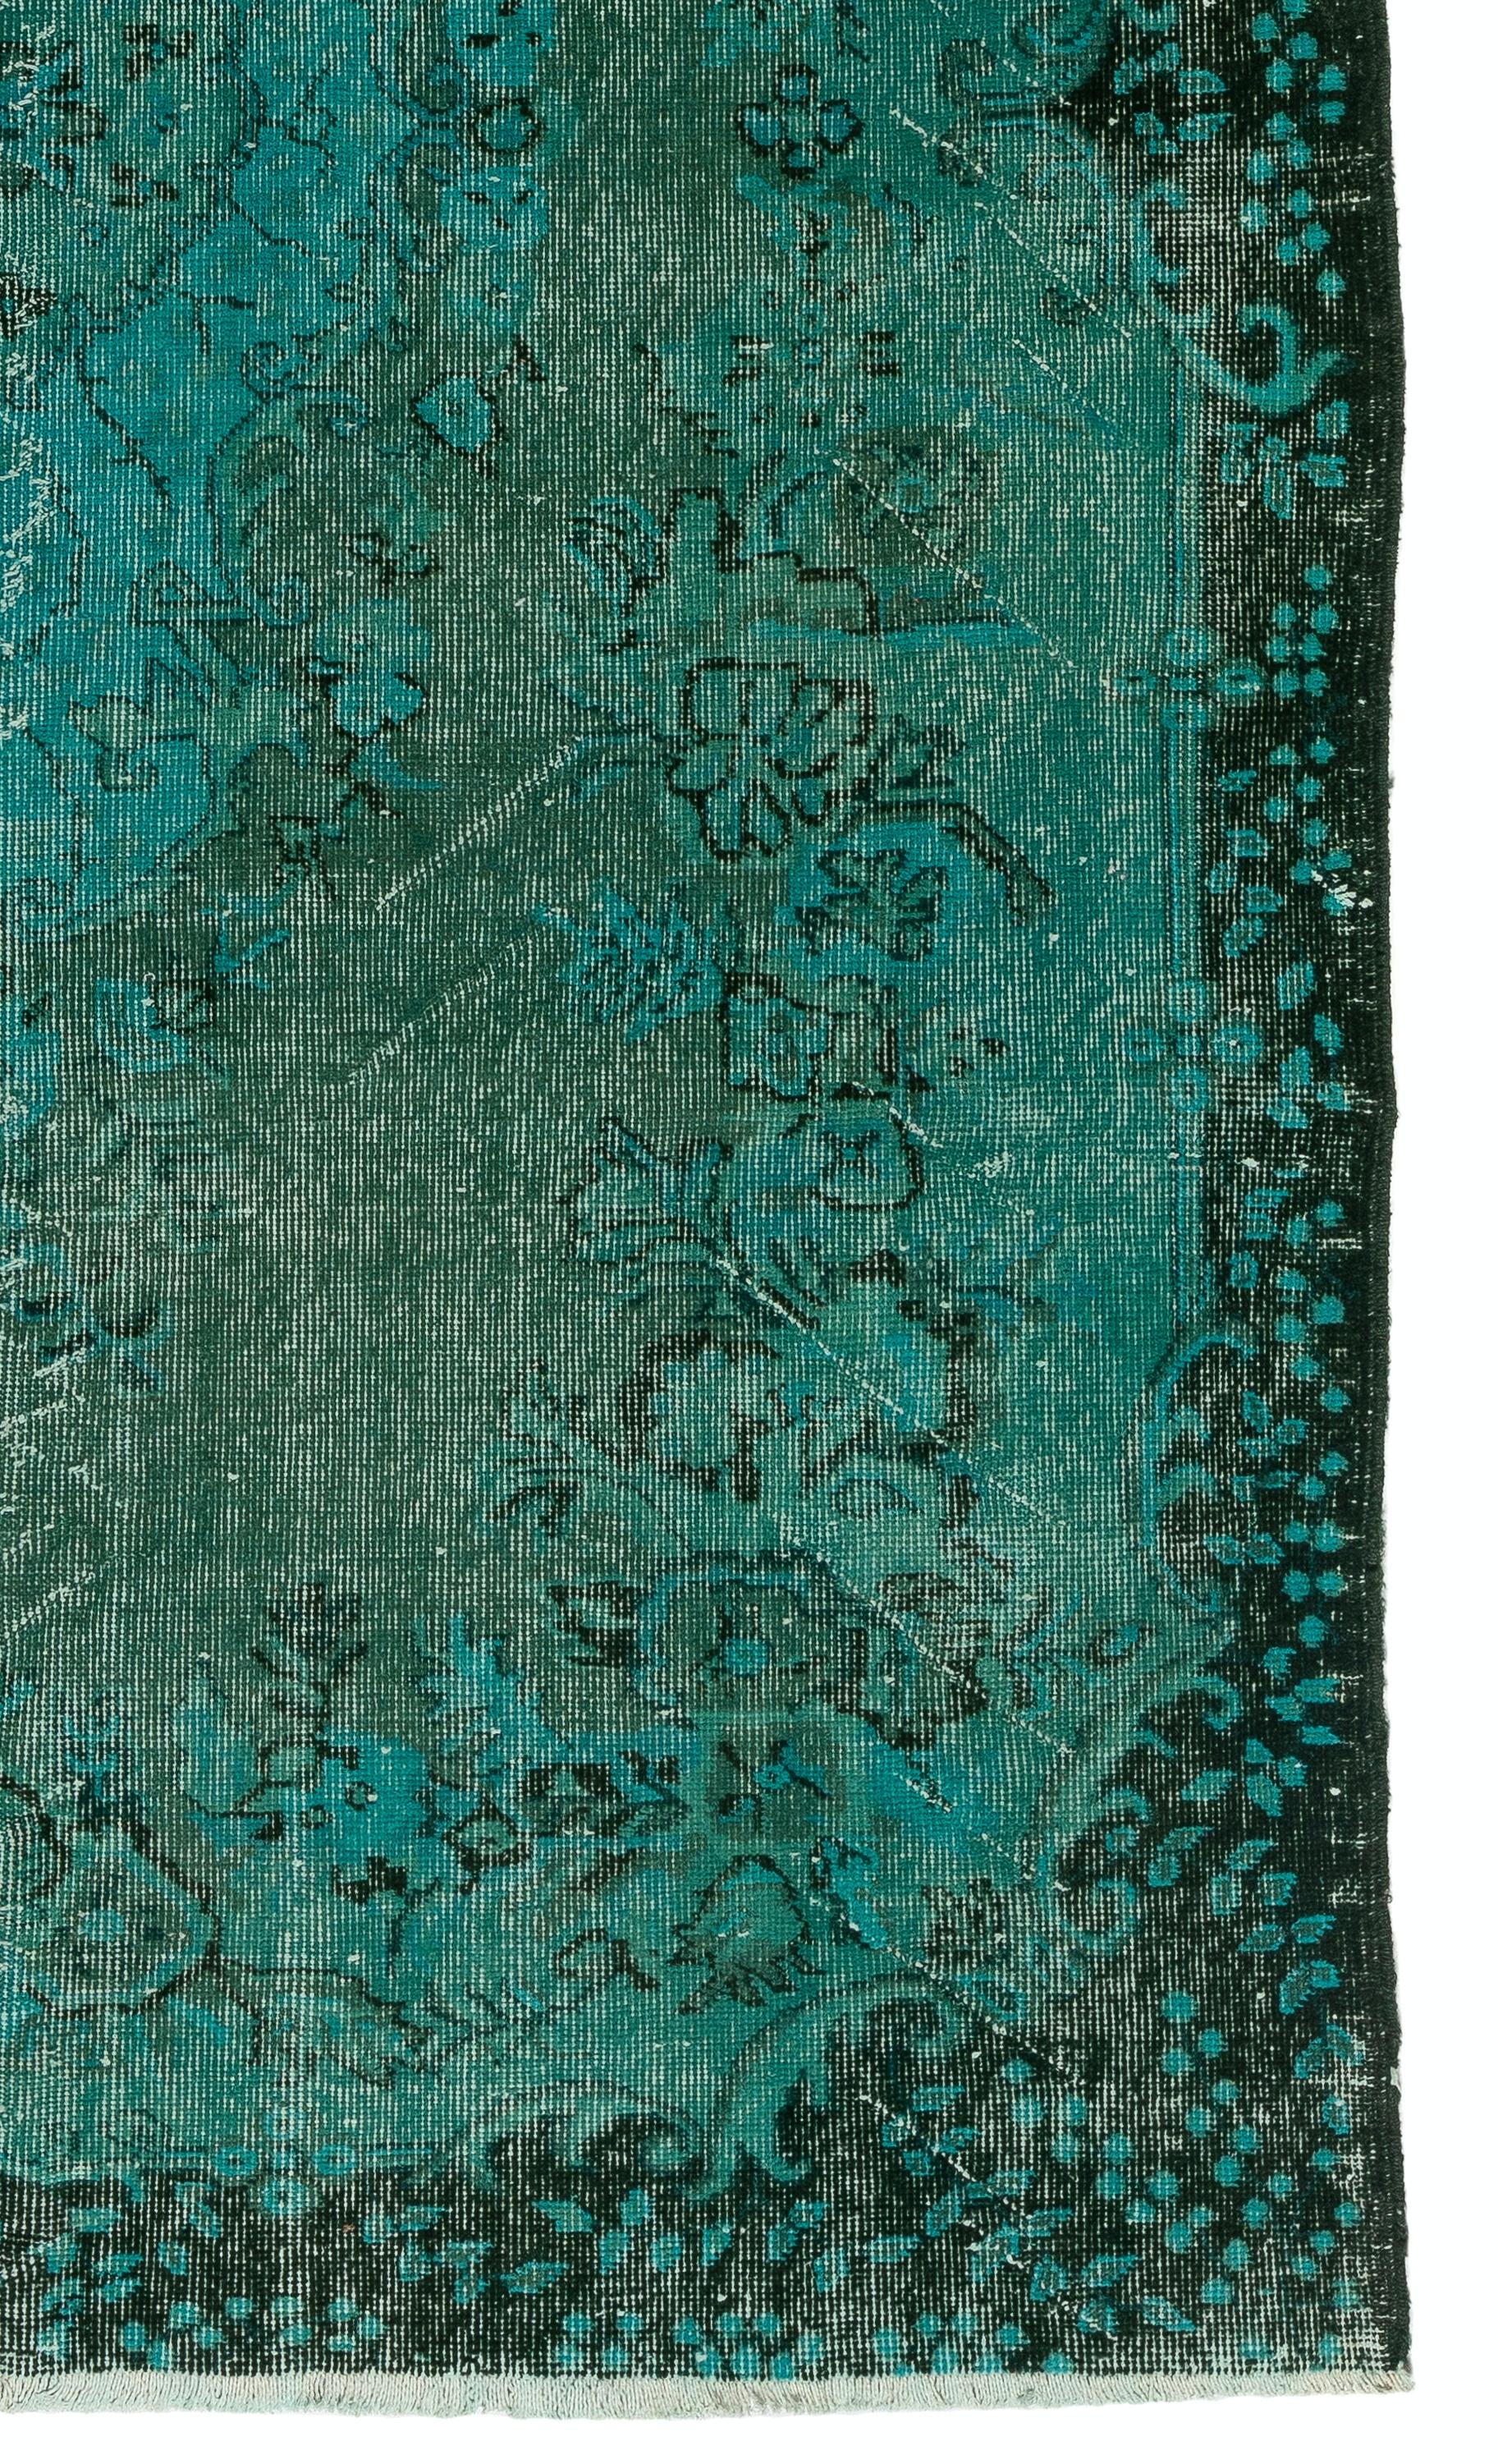 Hand-Woven 4.5x9 Ft One-of-a-Kind Vintage Area Rug Over-Dyed in Teal Color, Handmade Carpet